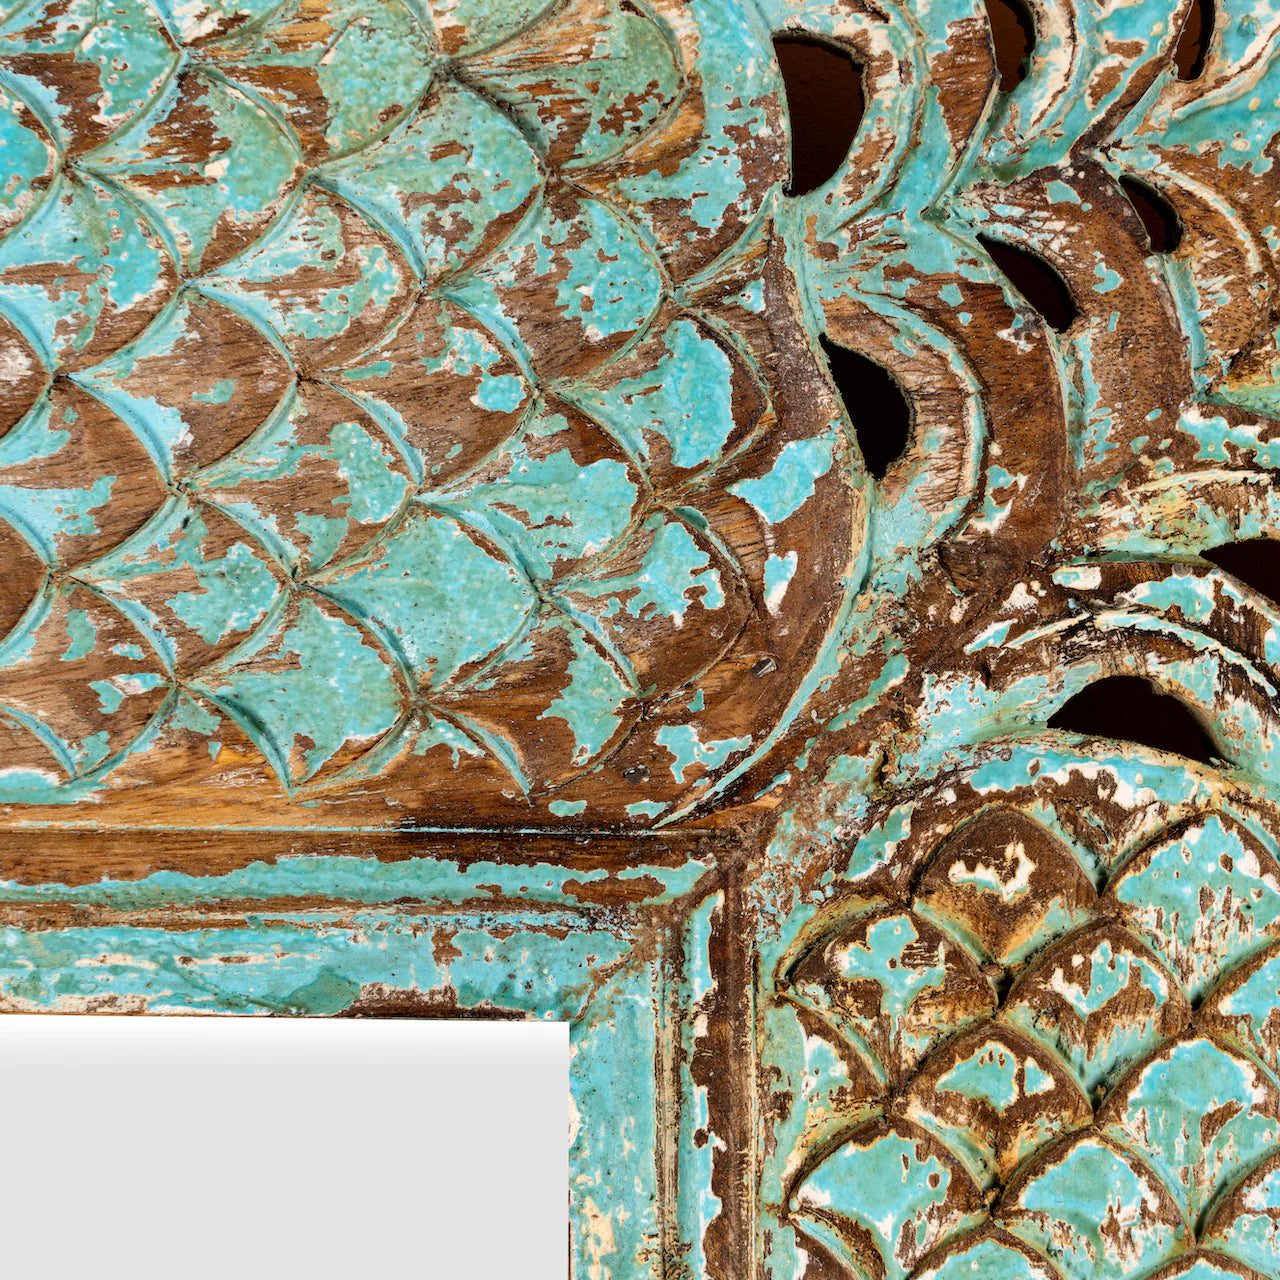 Turquoise Carved Rustic Mirror